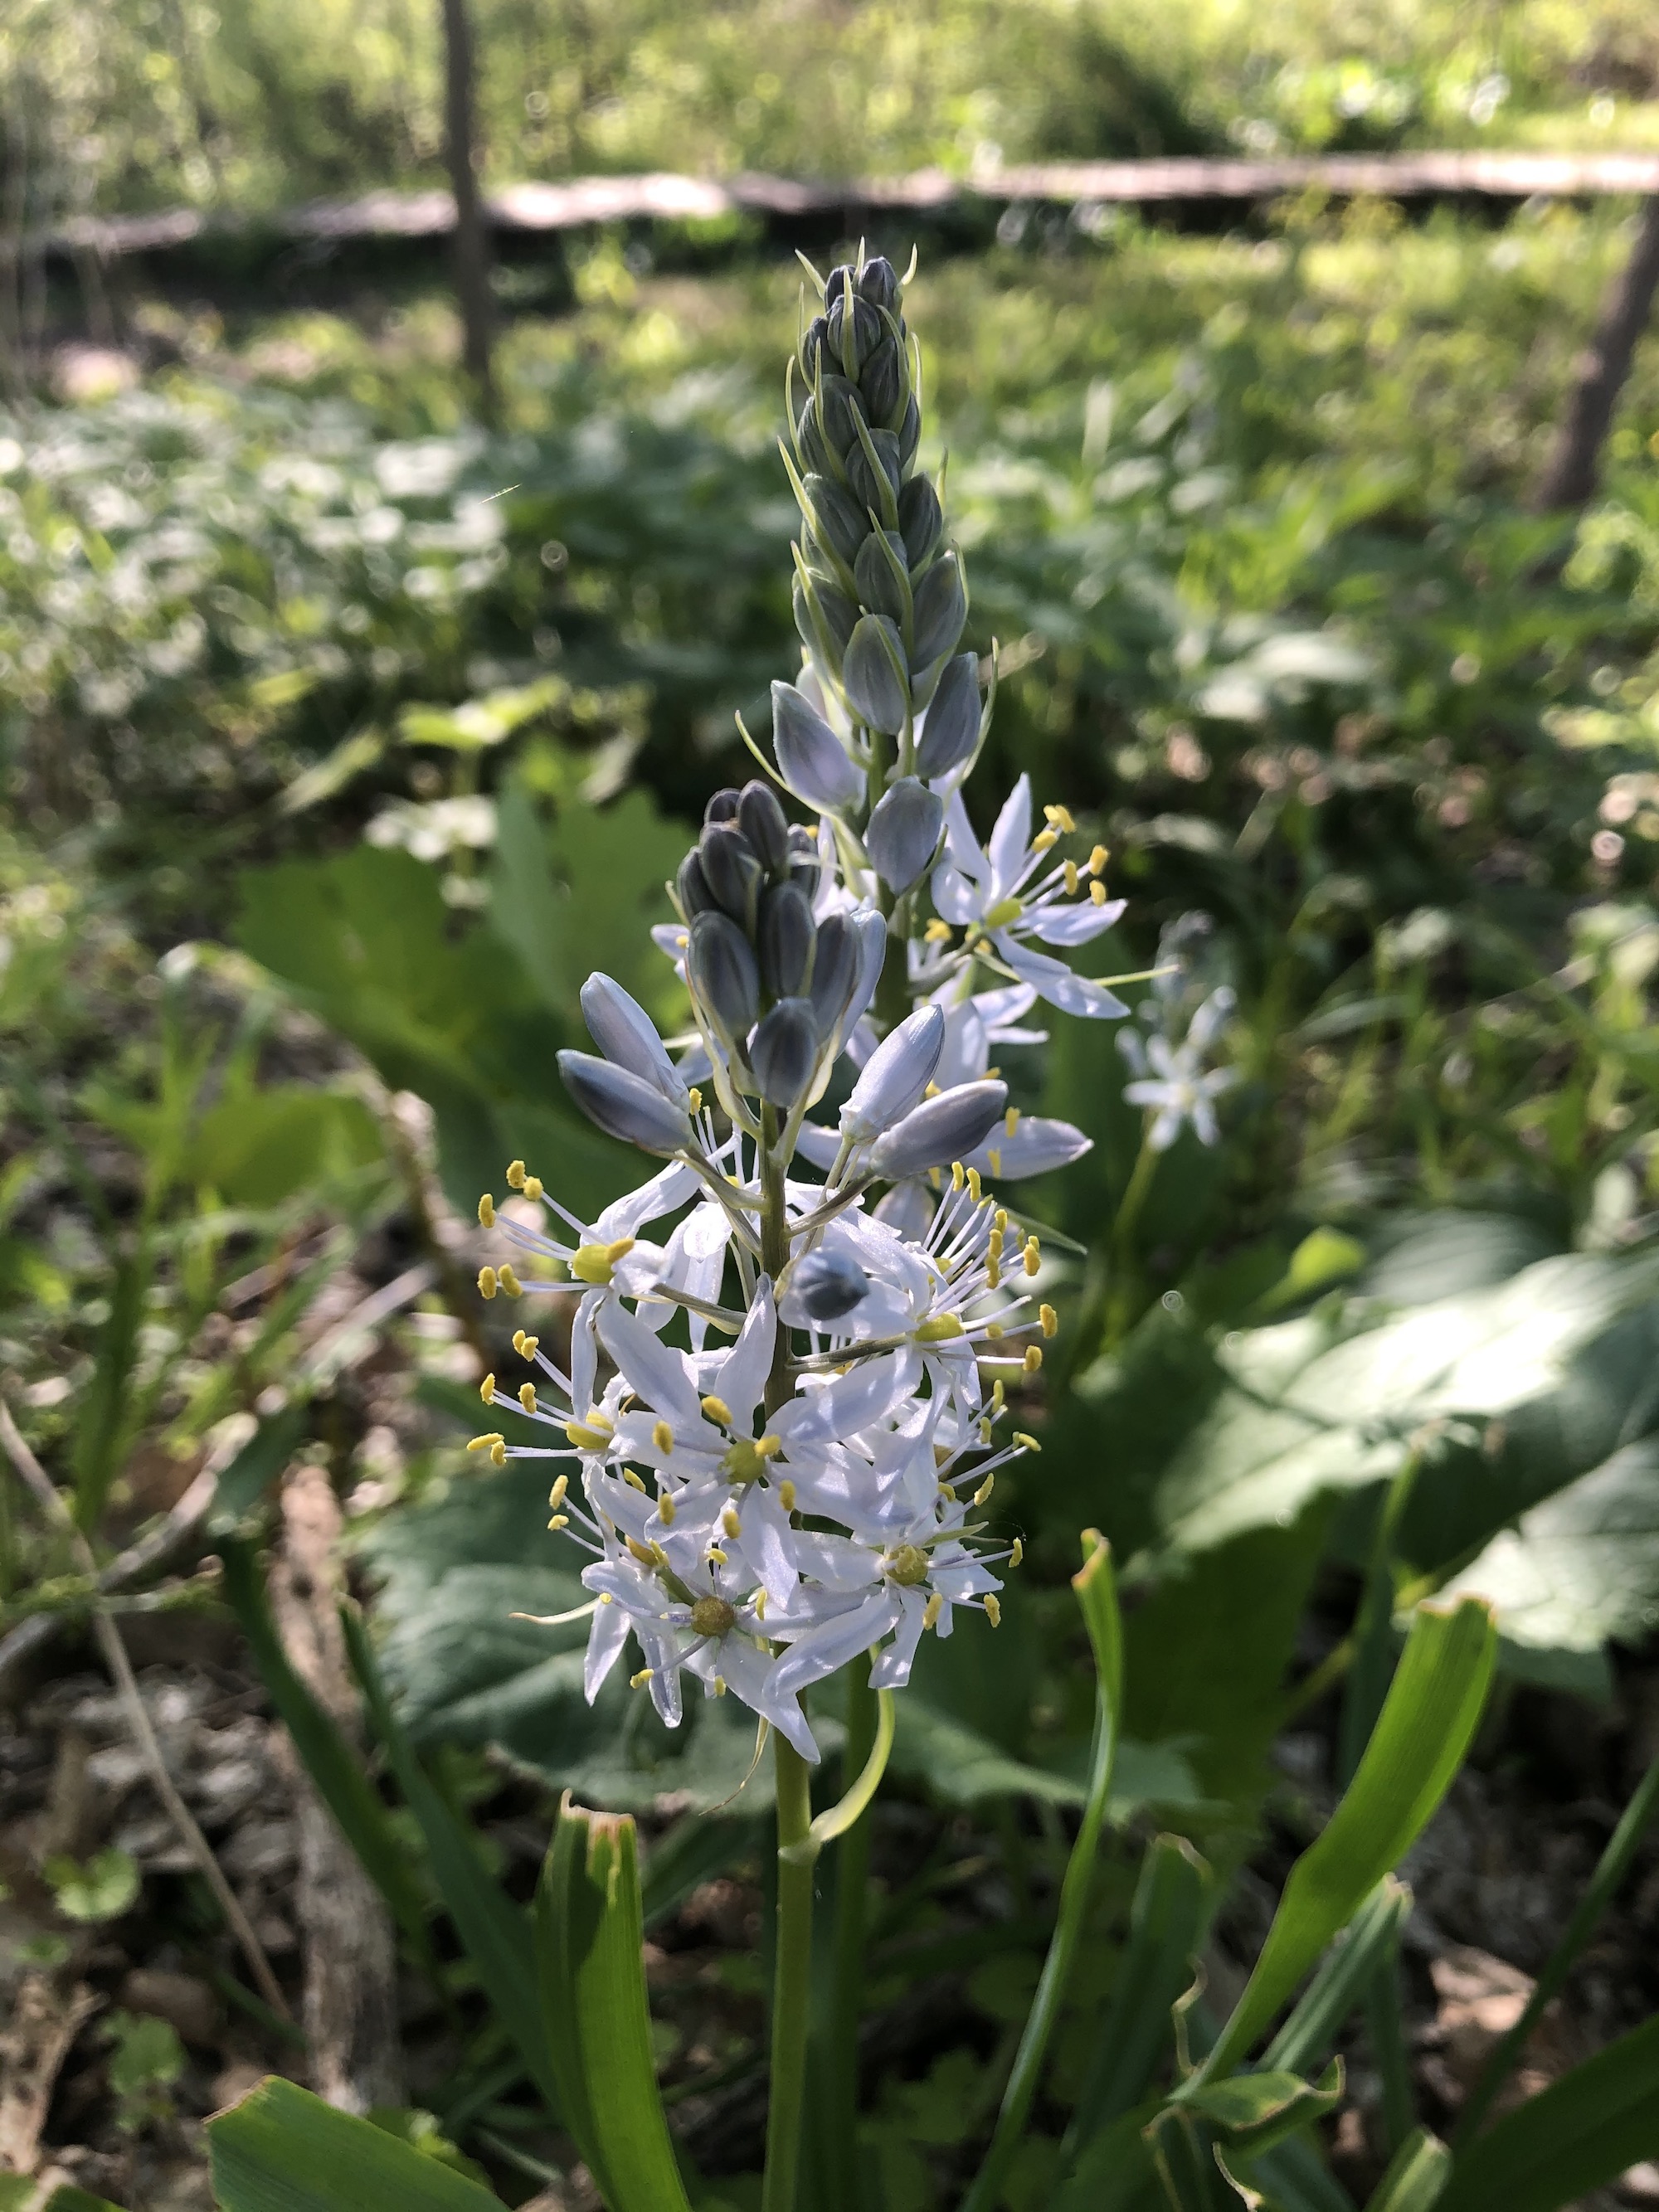 Wild Hyacinth by Council Ring in Oak Savanna on May 11, 2021.